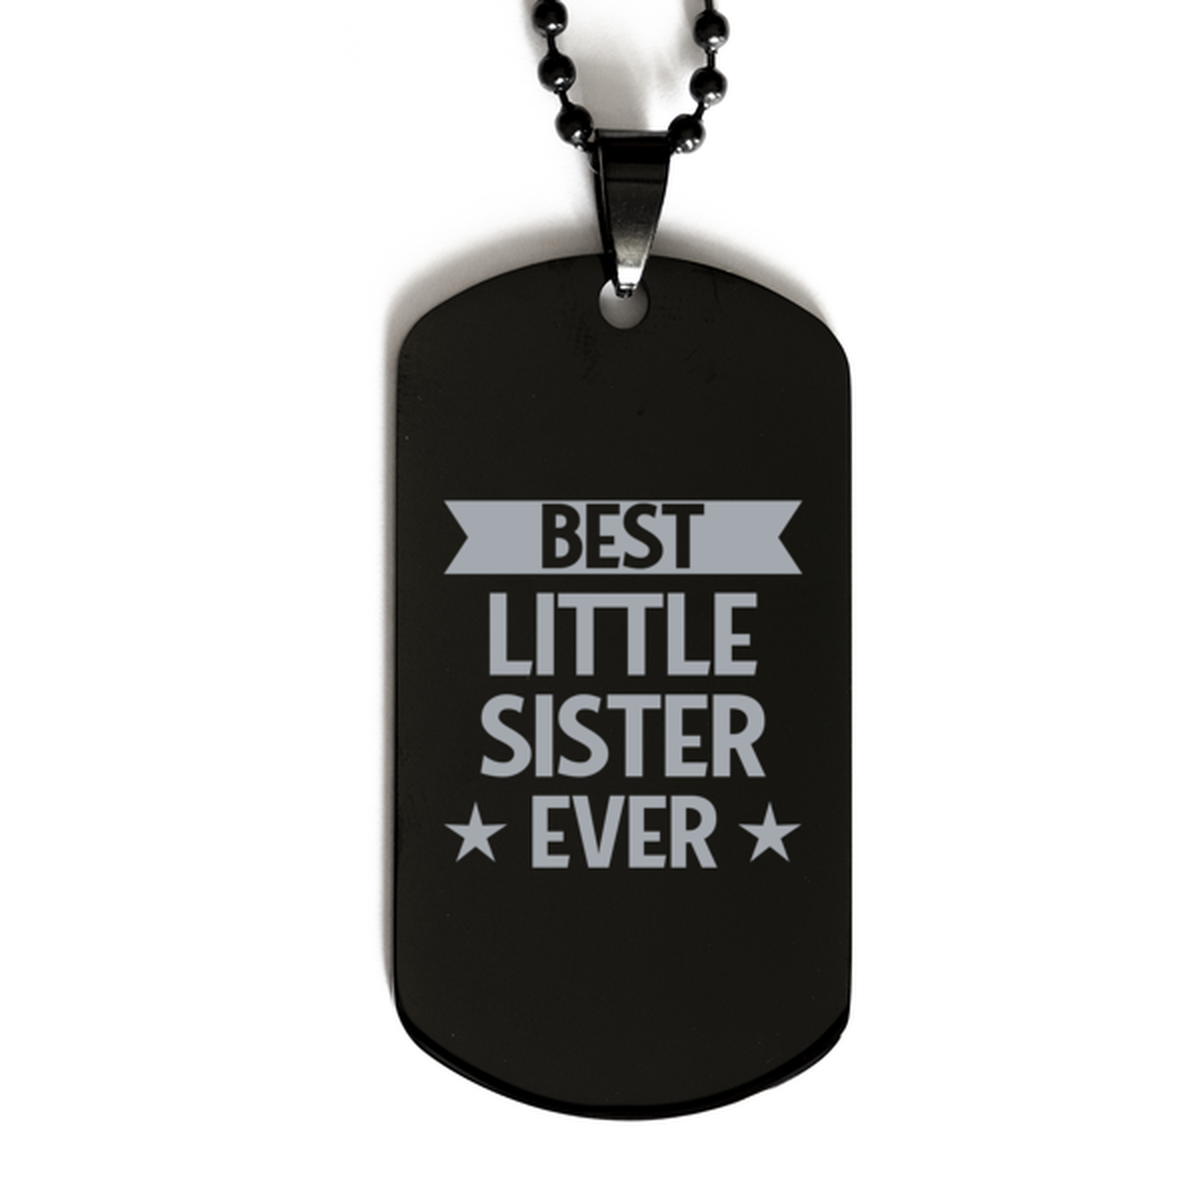 Best Little Sister Ever Little Sister Gifts, Funny Black Dog Tag For Little Sister, Birthday Family Presents Engraved Necklace For Women